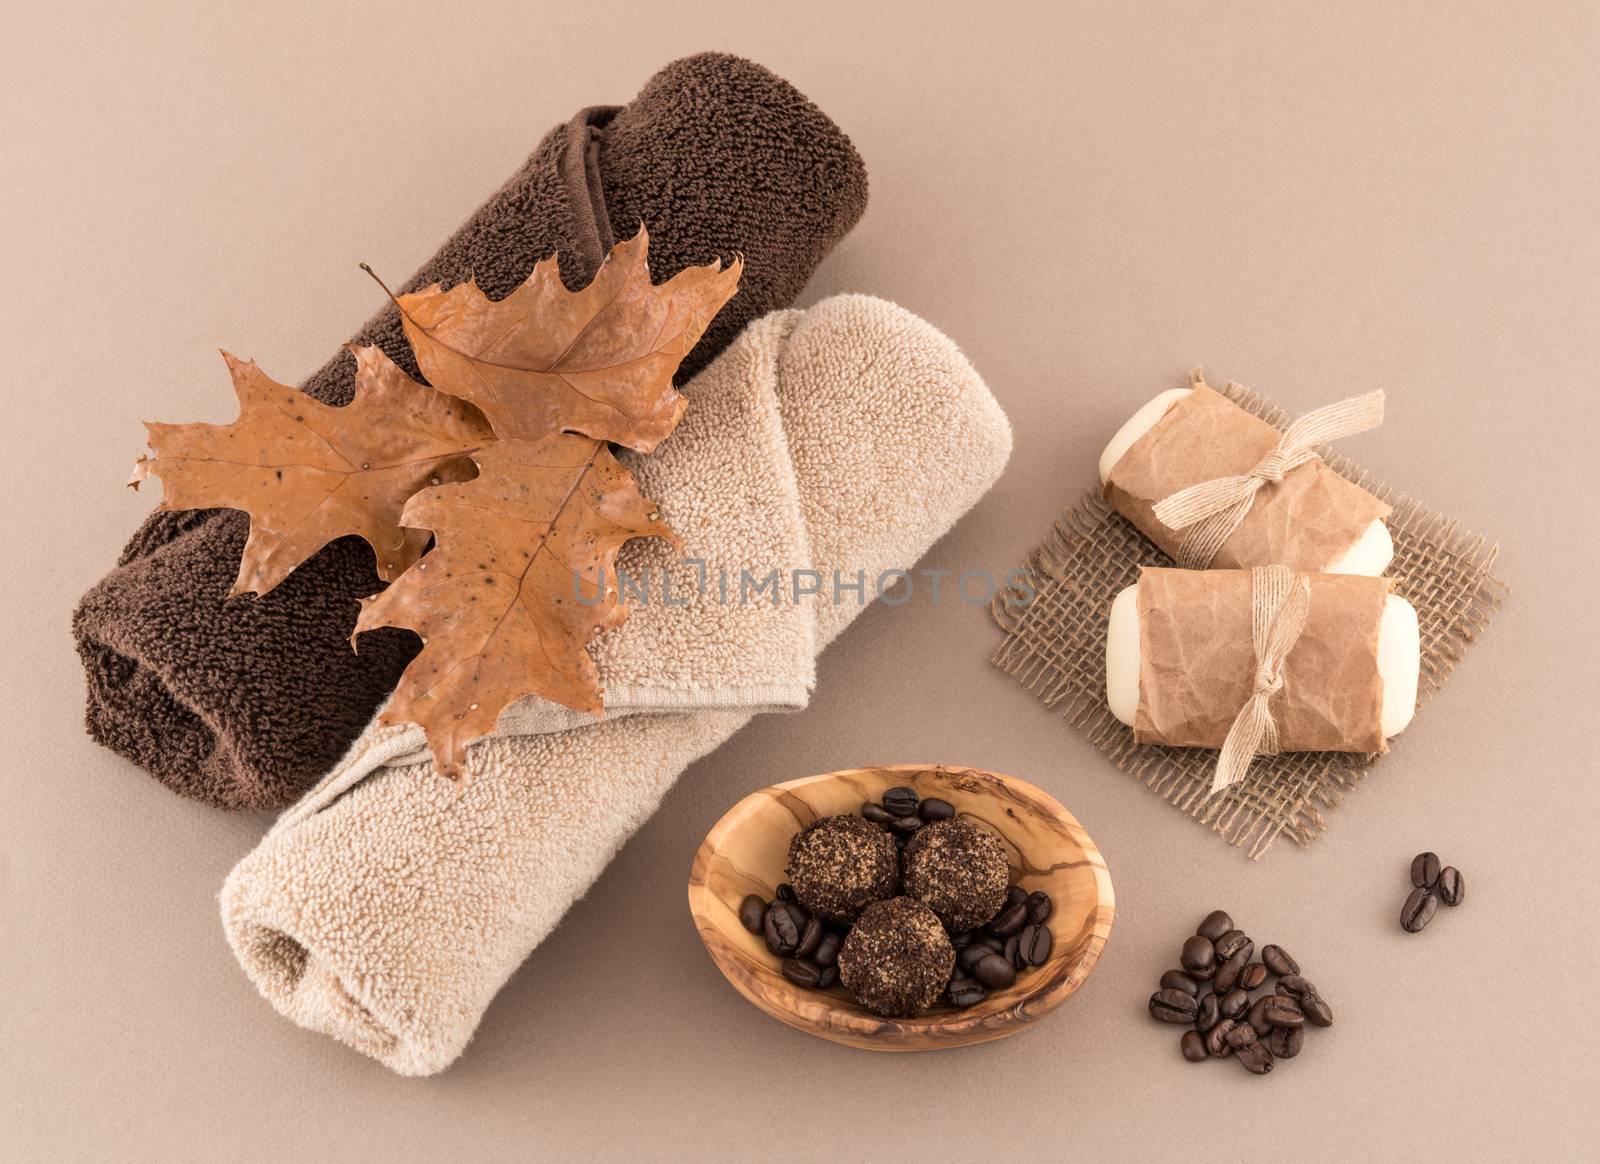 Autumn Spa with Coffee Bath Bombs, Soap, and Luxury Towels by krisblackphotography